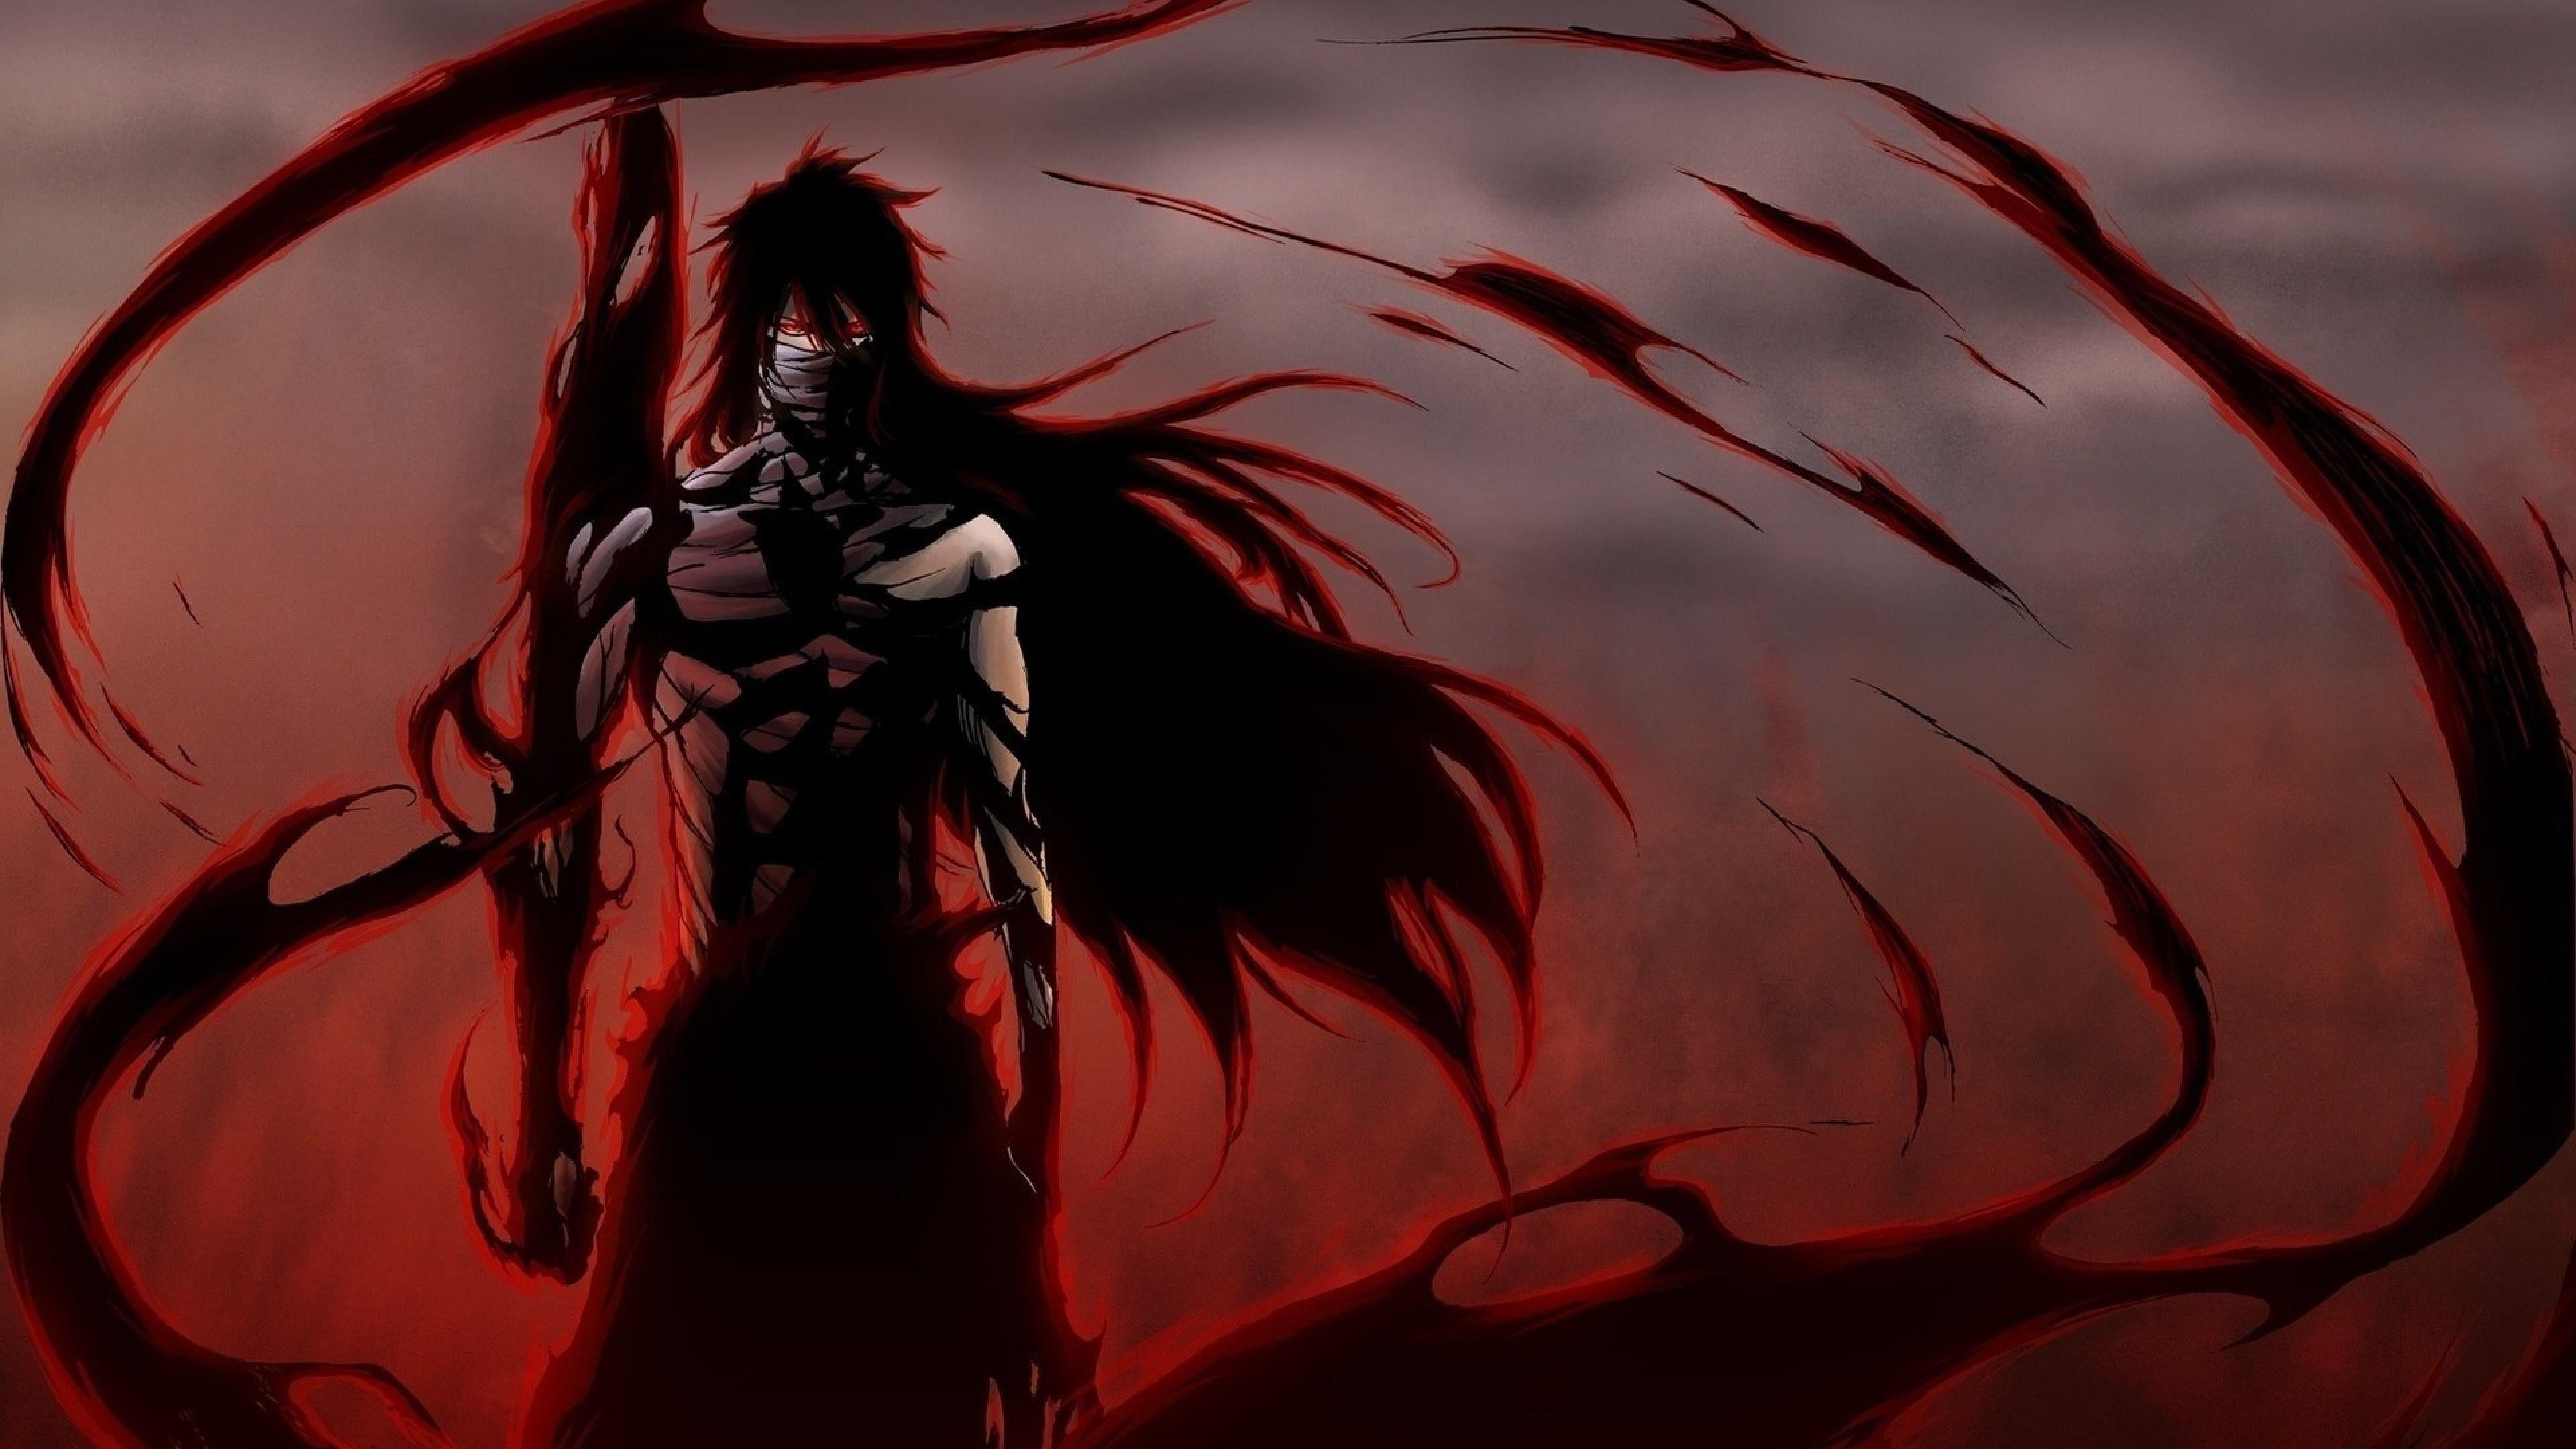 Black and Red Anime Wallpapers - Top Free Black and Red Anime Backgrounds - WallpaperAccess